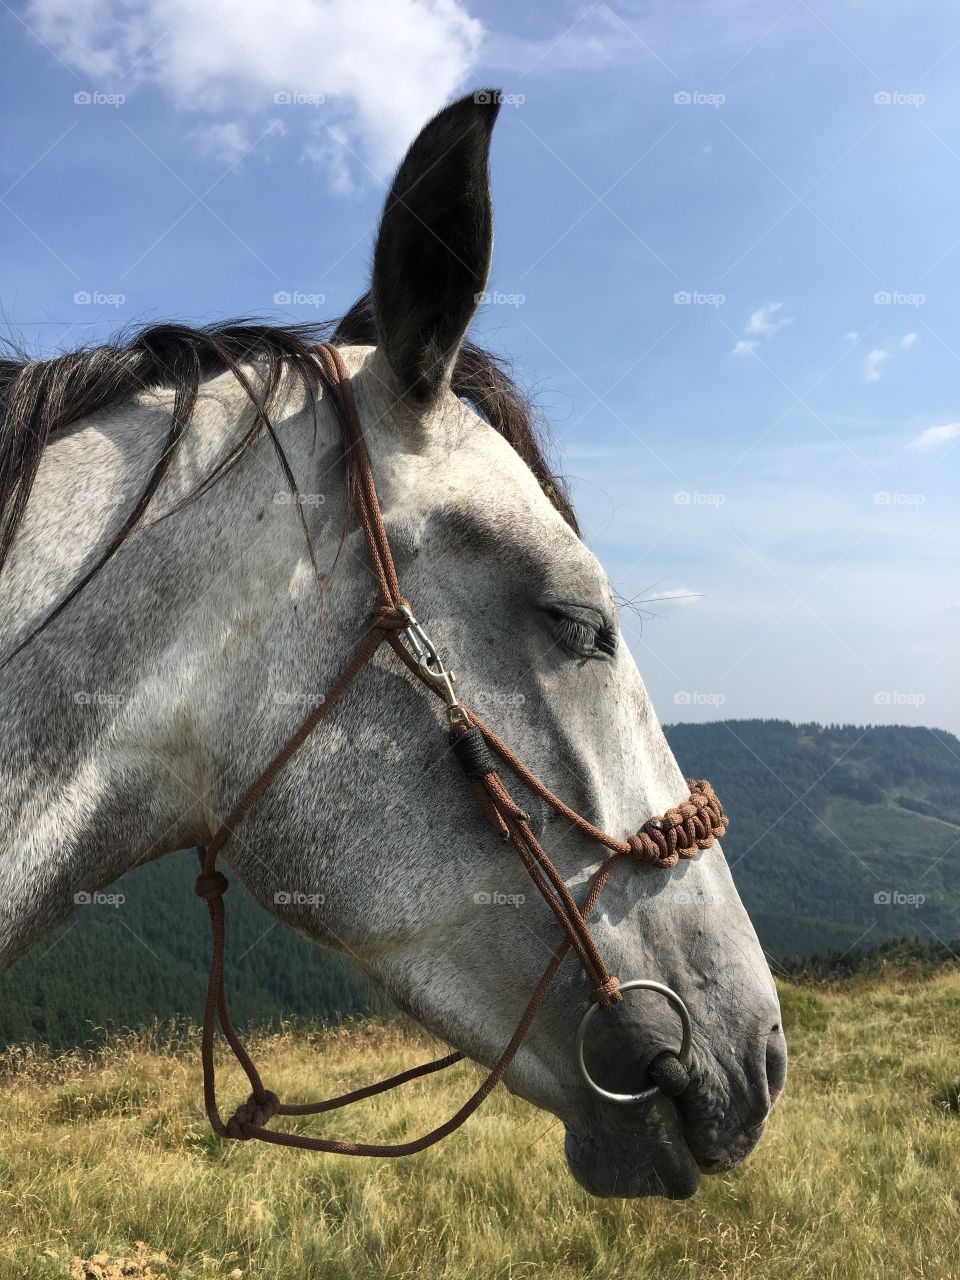 Horse with a view 